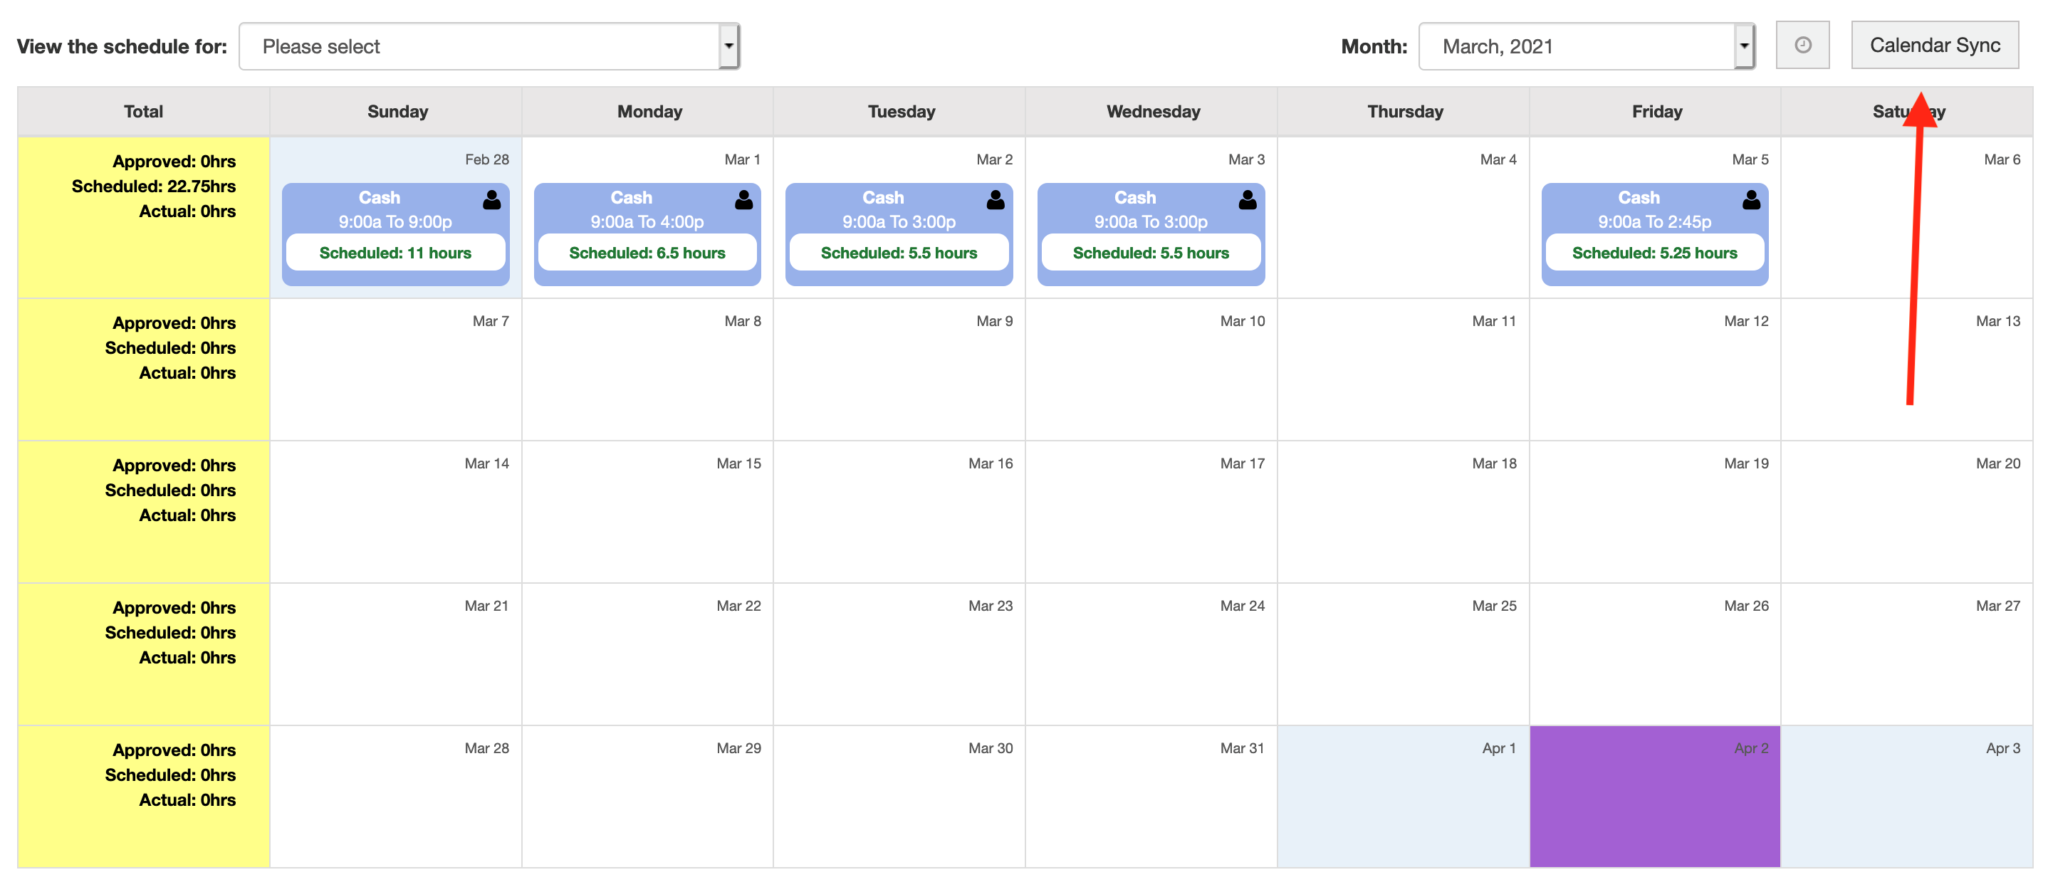 Can I sync my schedule with Google or Apple Calendar